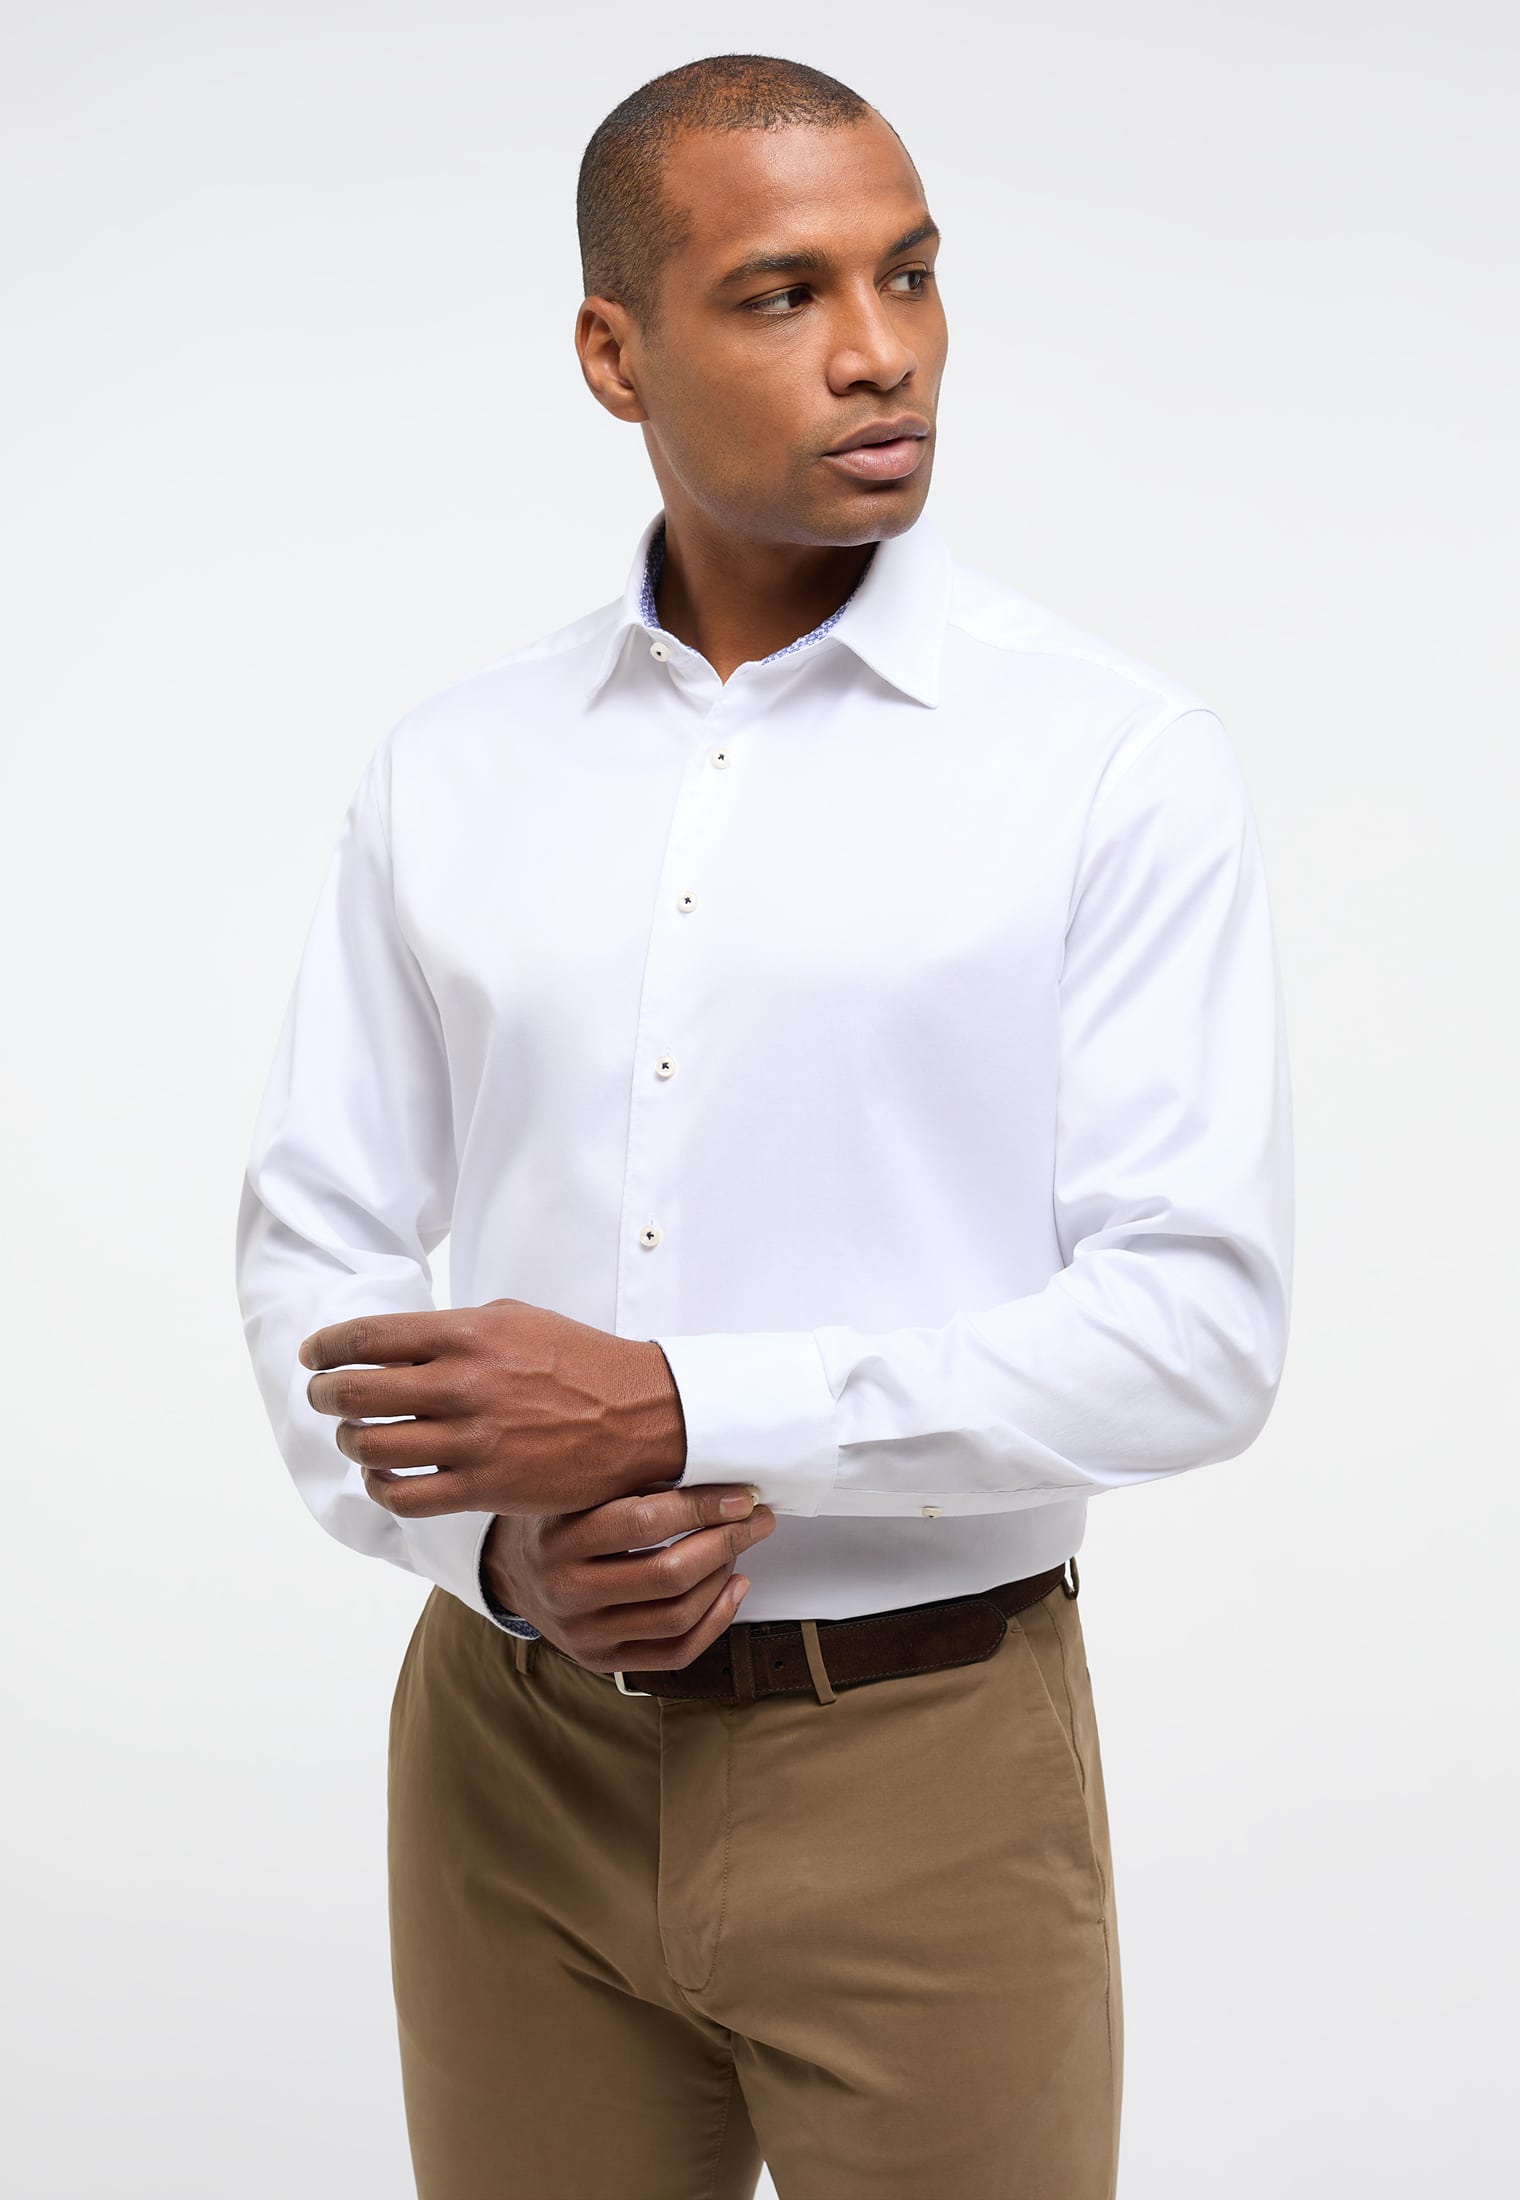 COMFORT FIT Soft Luxury Shirt in off-white unifarben | off-white | 47 |  Langarm | 1SH11589-00-02-47-1/1